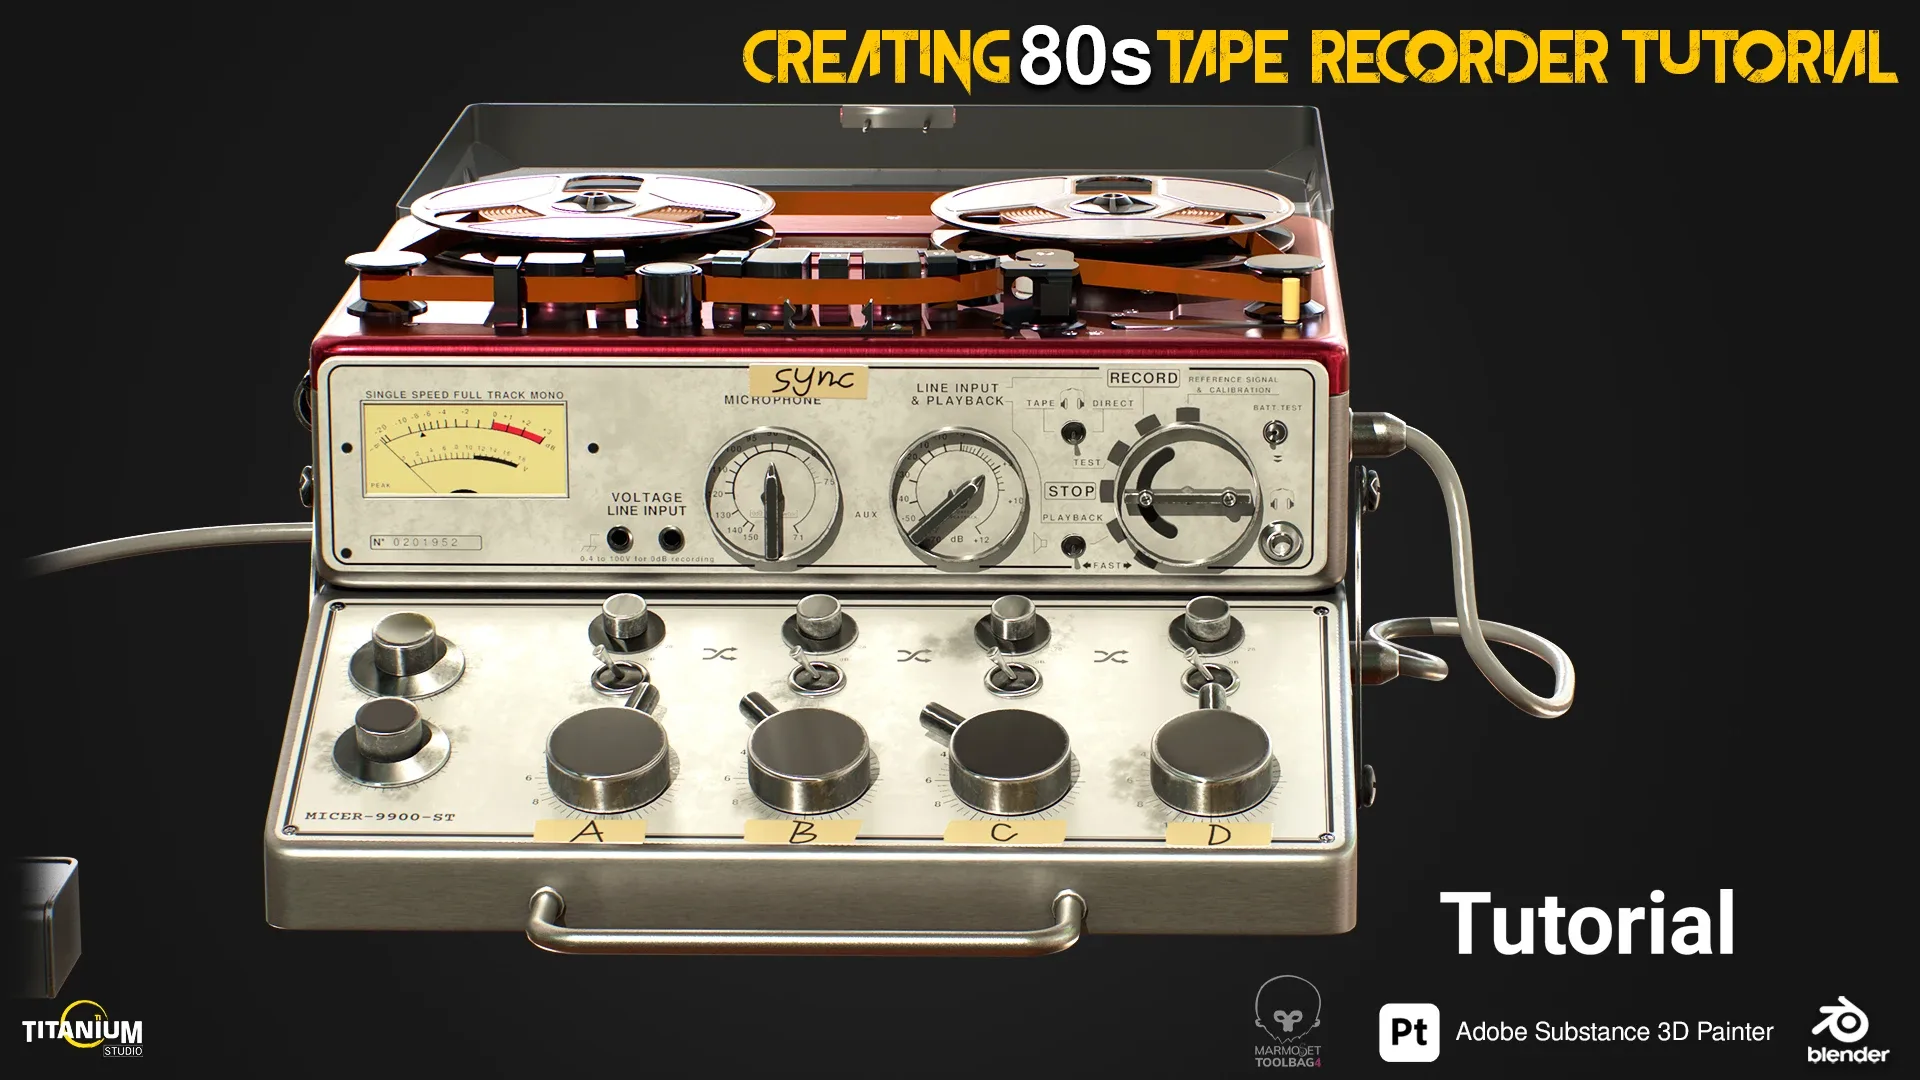 80s Tape Recorder from Start to Finish Creating Process